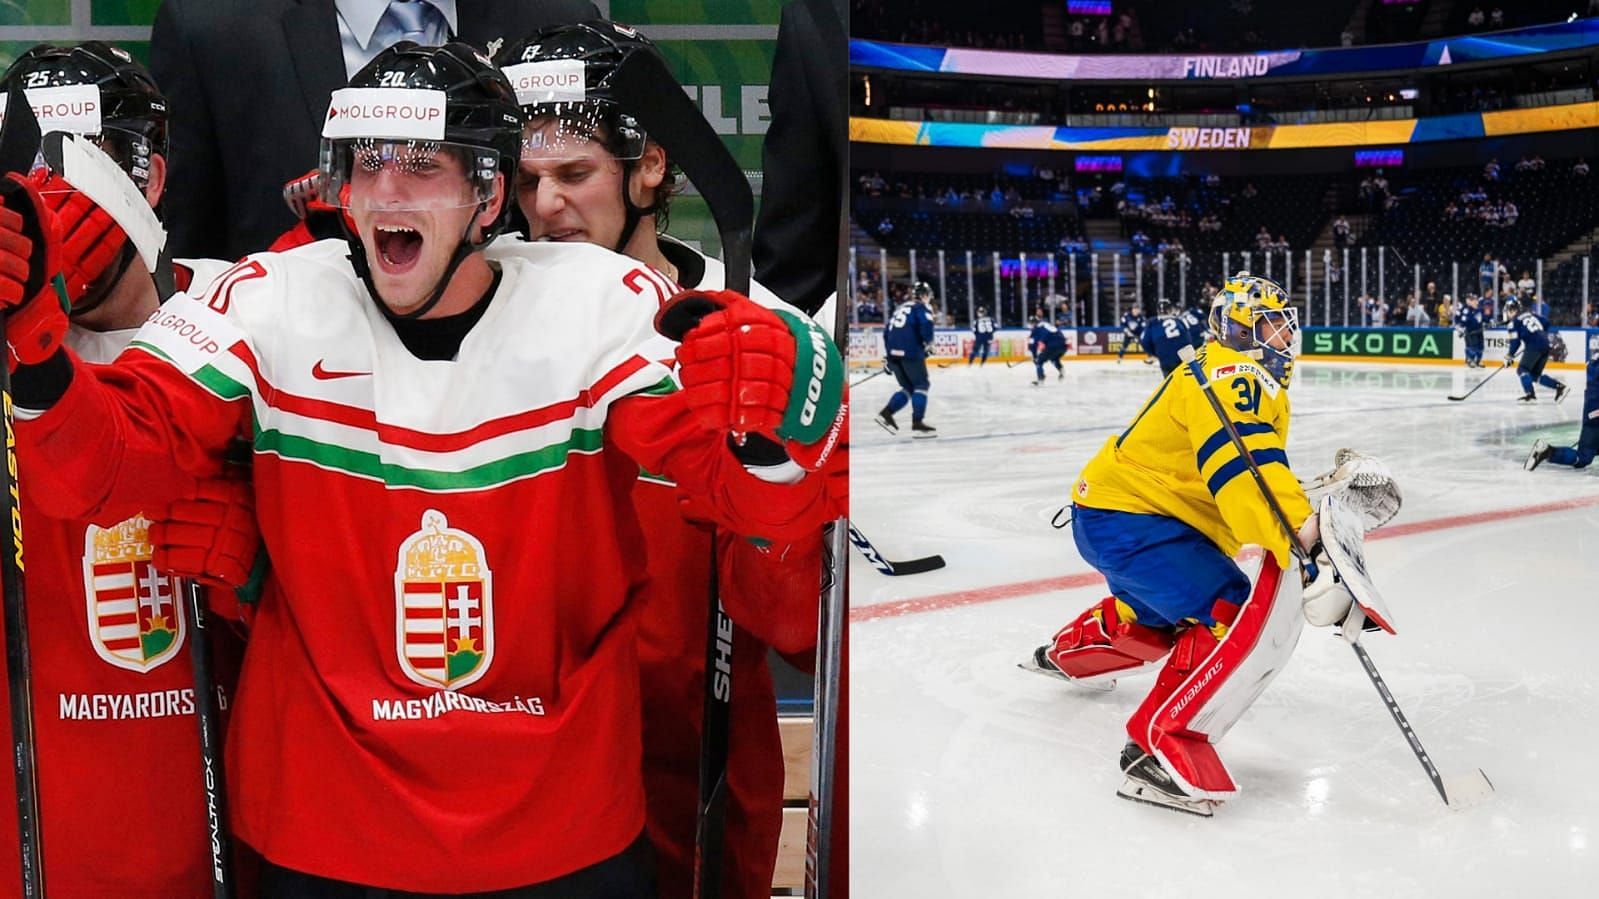 Sweden vs Hungary Group A How to watch, live streaming, channel list and more